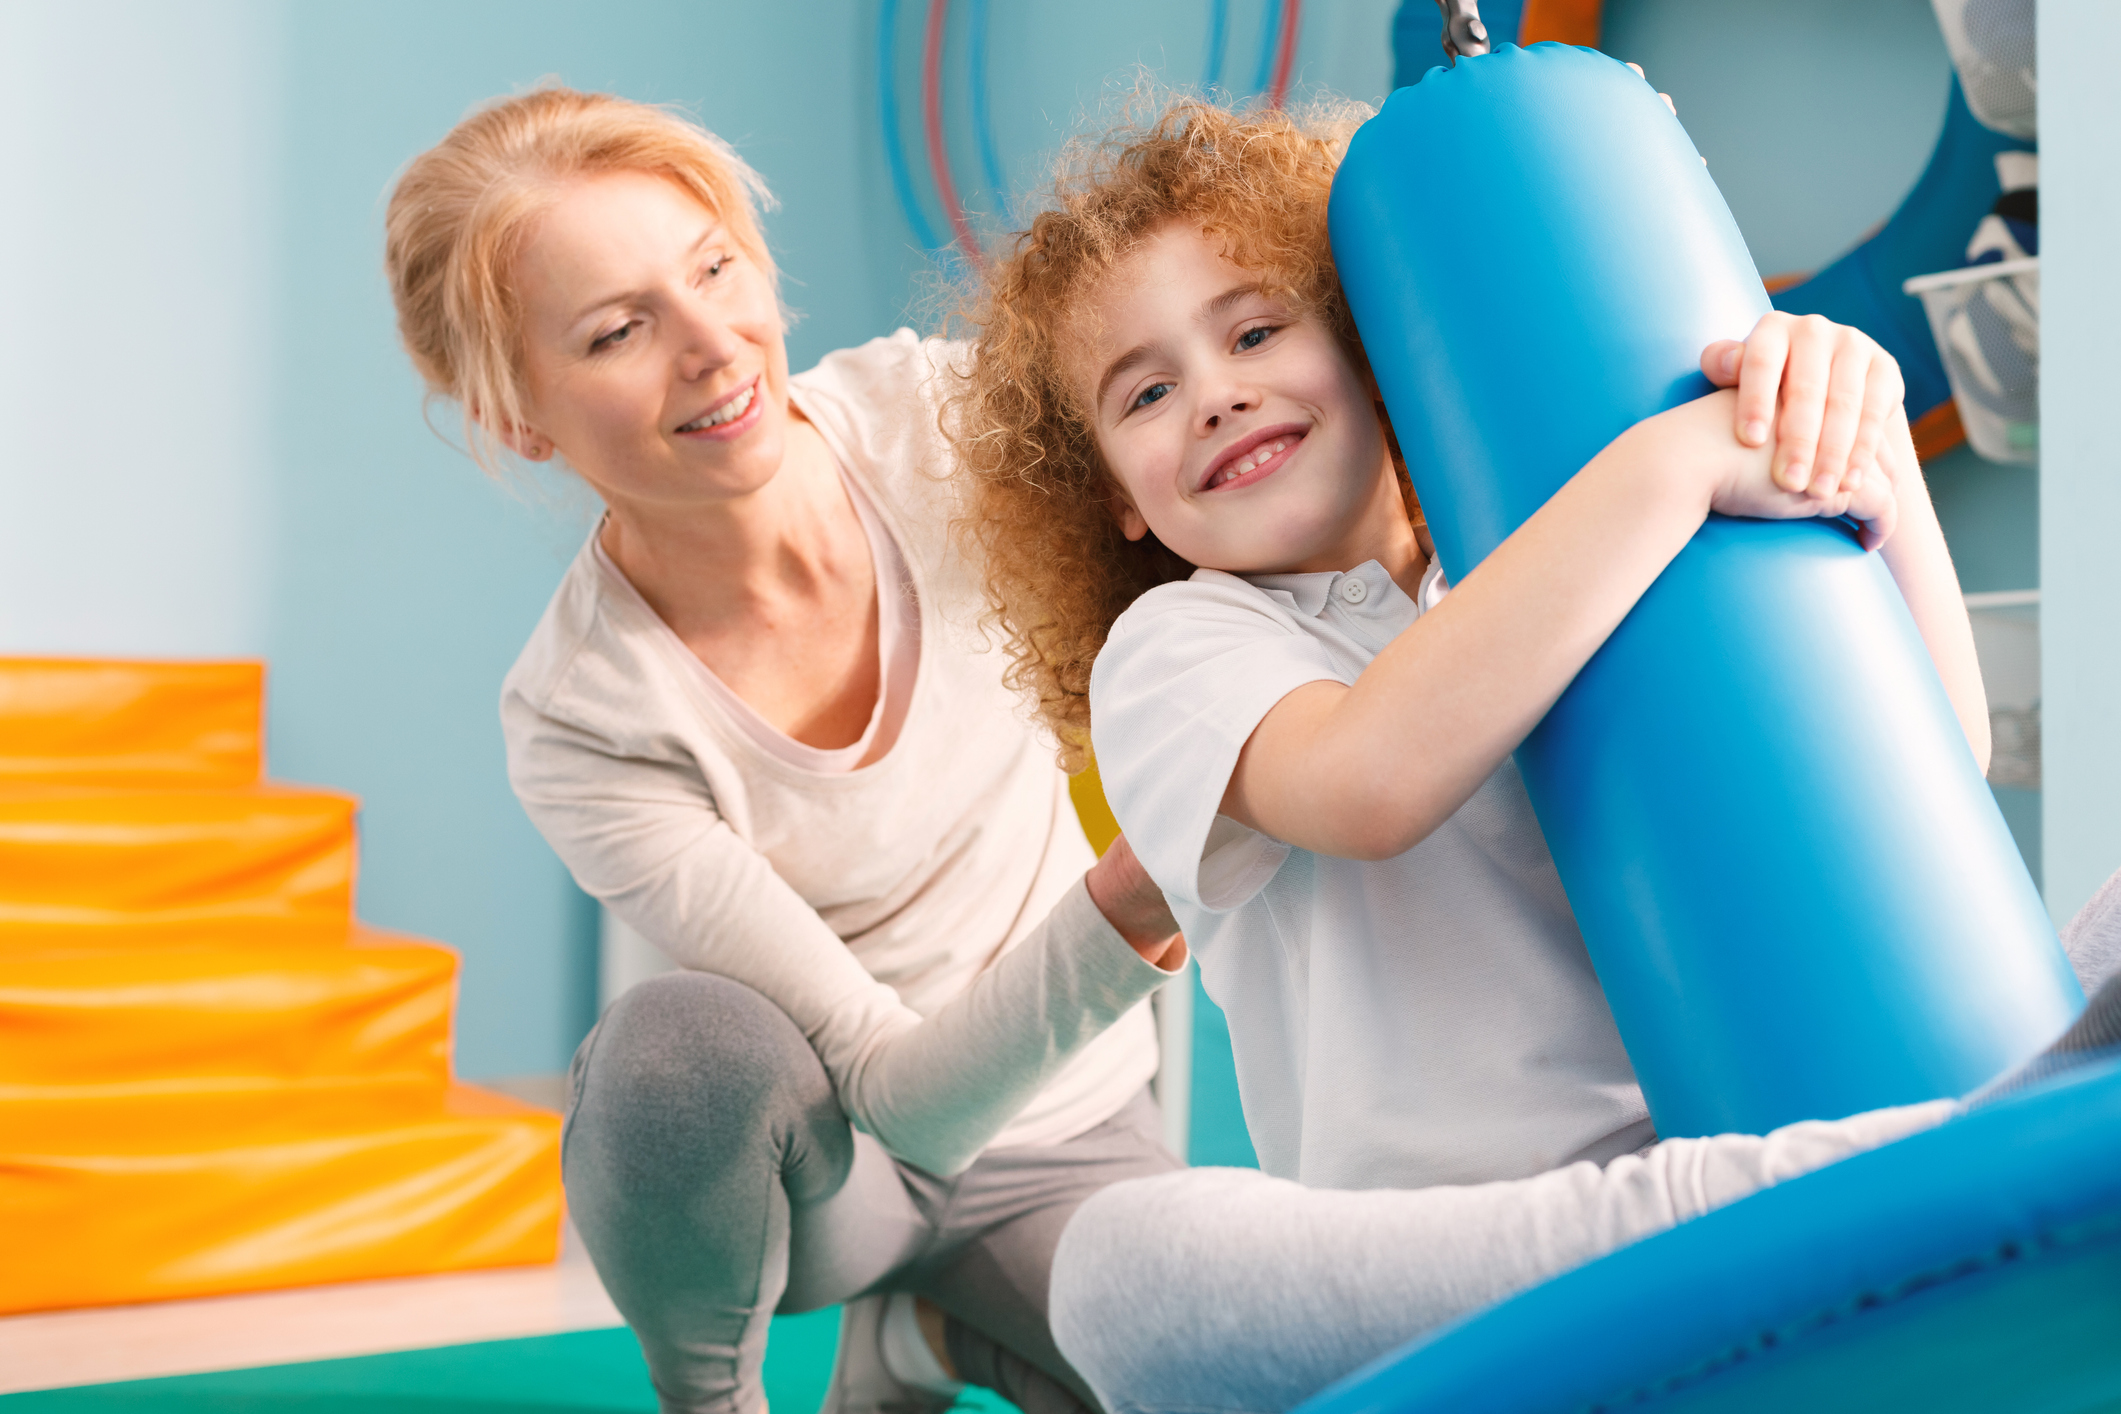 April is Occupational Therapy Month | RN.com